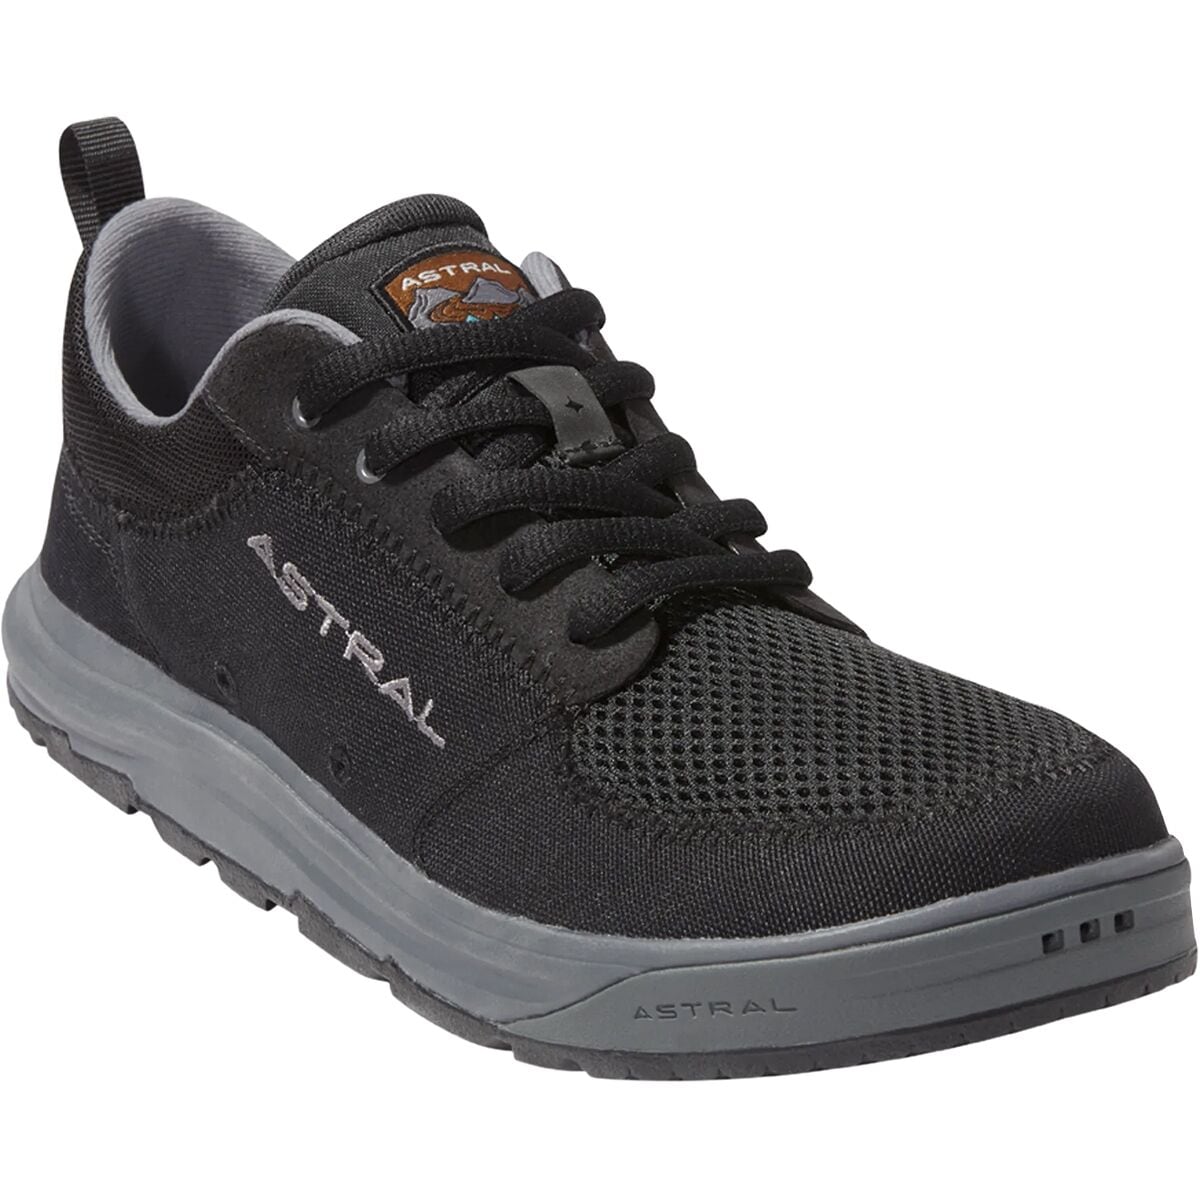 Astral Brewer 2 Water Shoe - Men's - Paddle